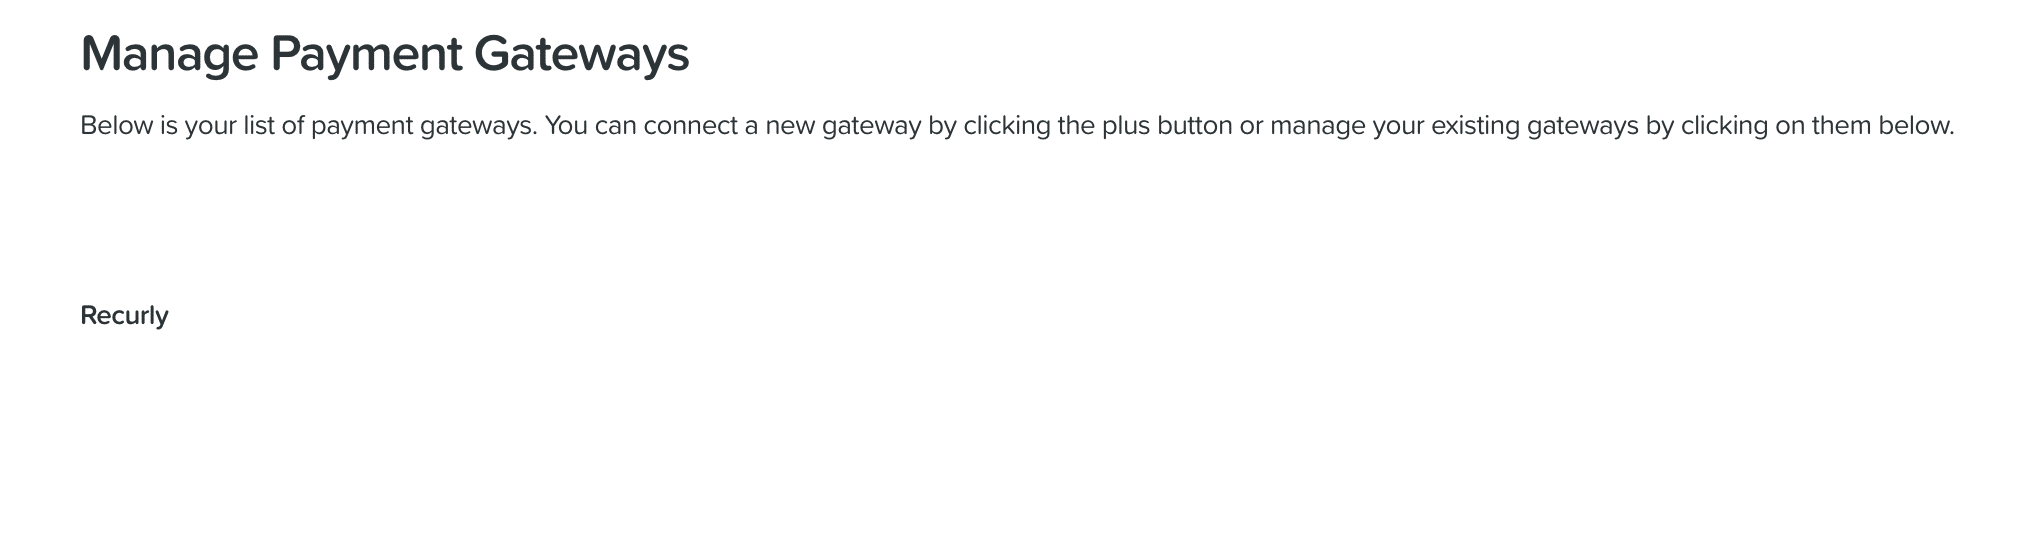 List of payment gateways in ClickFunnels account